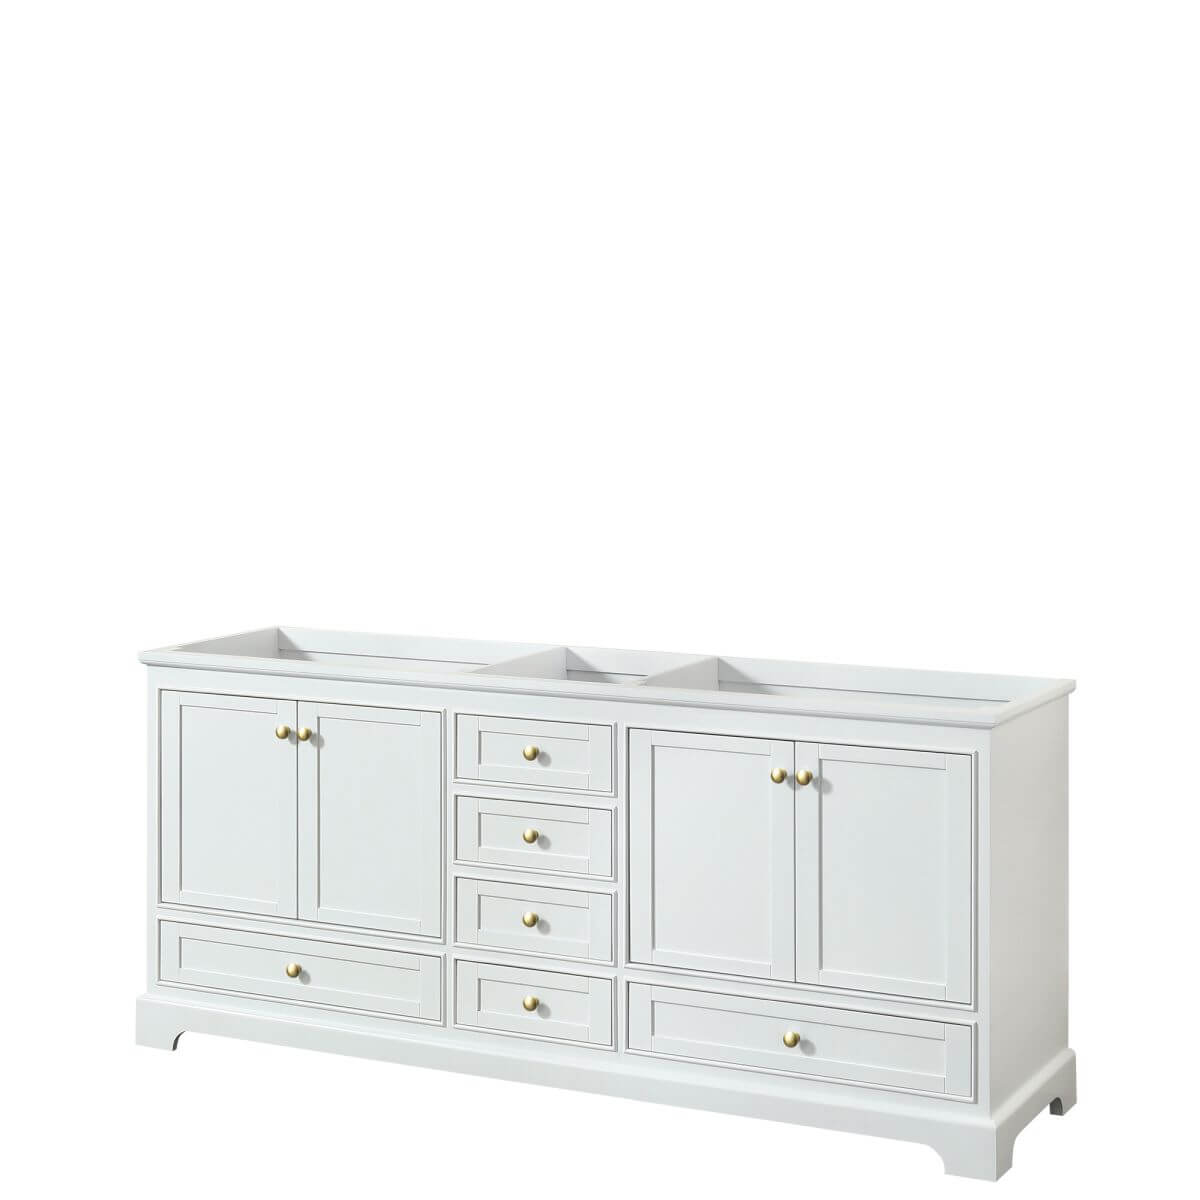 Wyndham Collection Deborah 80 inch Double Bathroom Vanity in White with Brushed Gold Trim, No Countertop, No Sinks and No Mirrors - WCS202080DWGCXSXXMXX